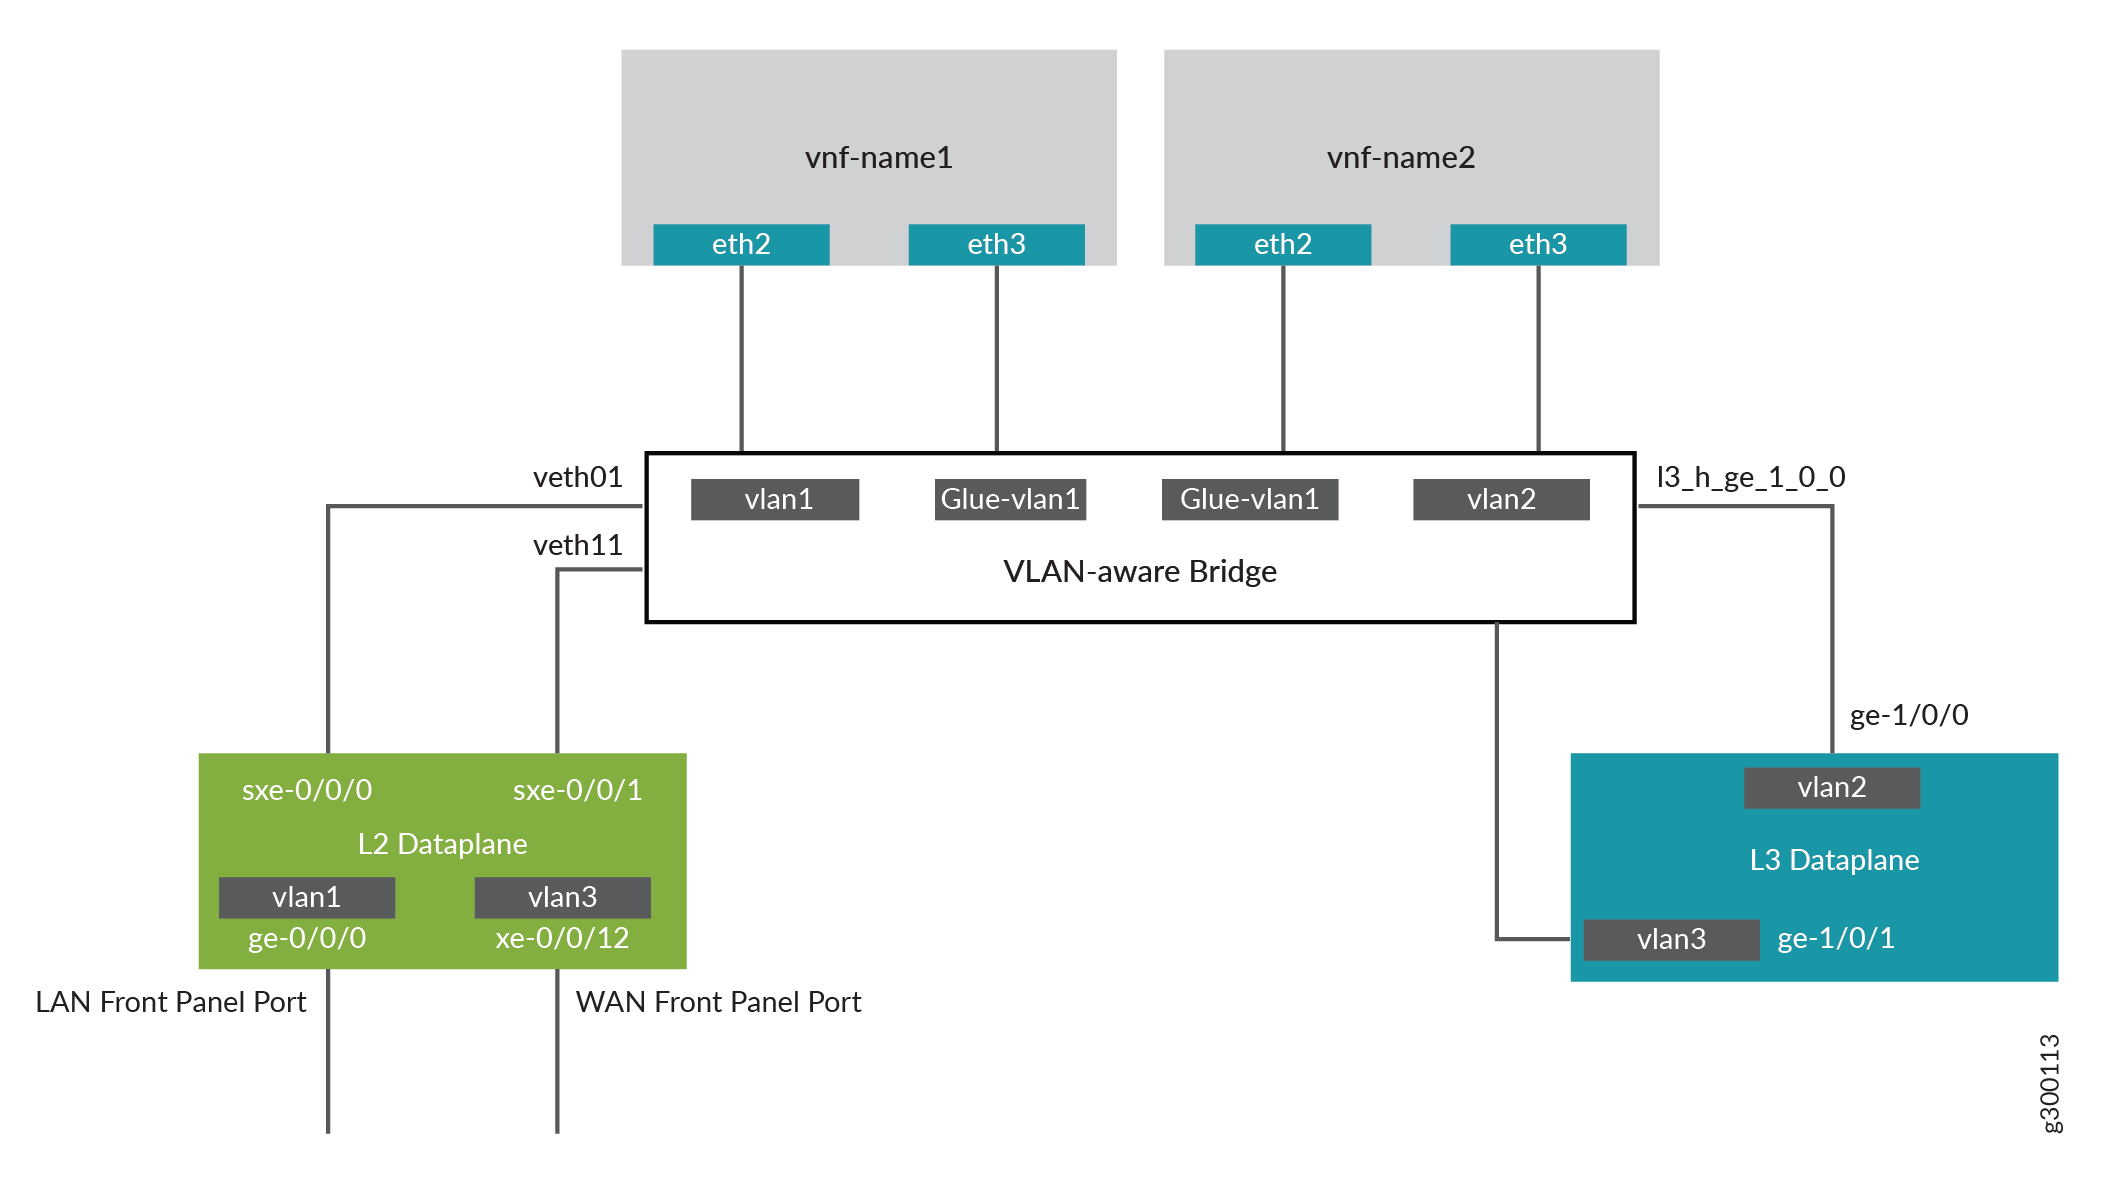 Configuring Service Chaining Using VLANs